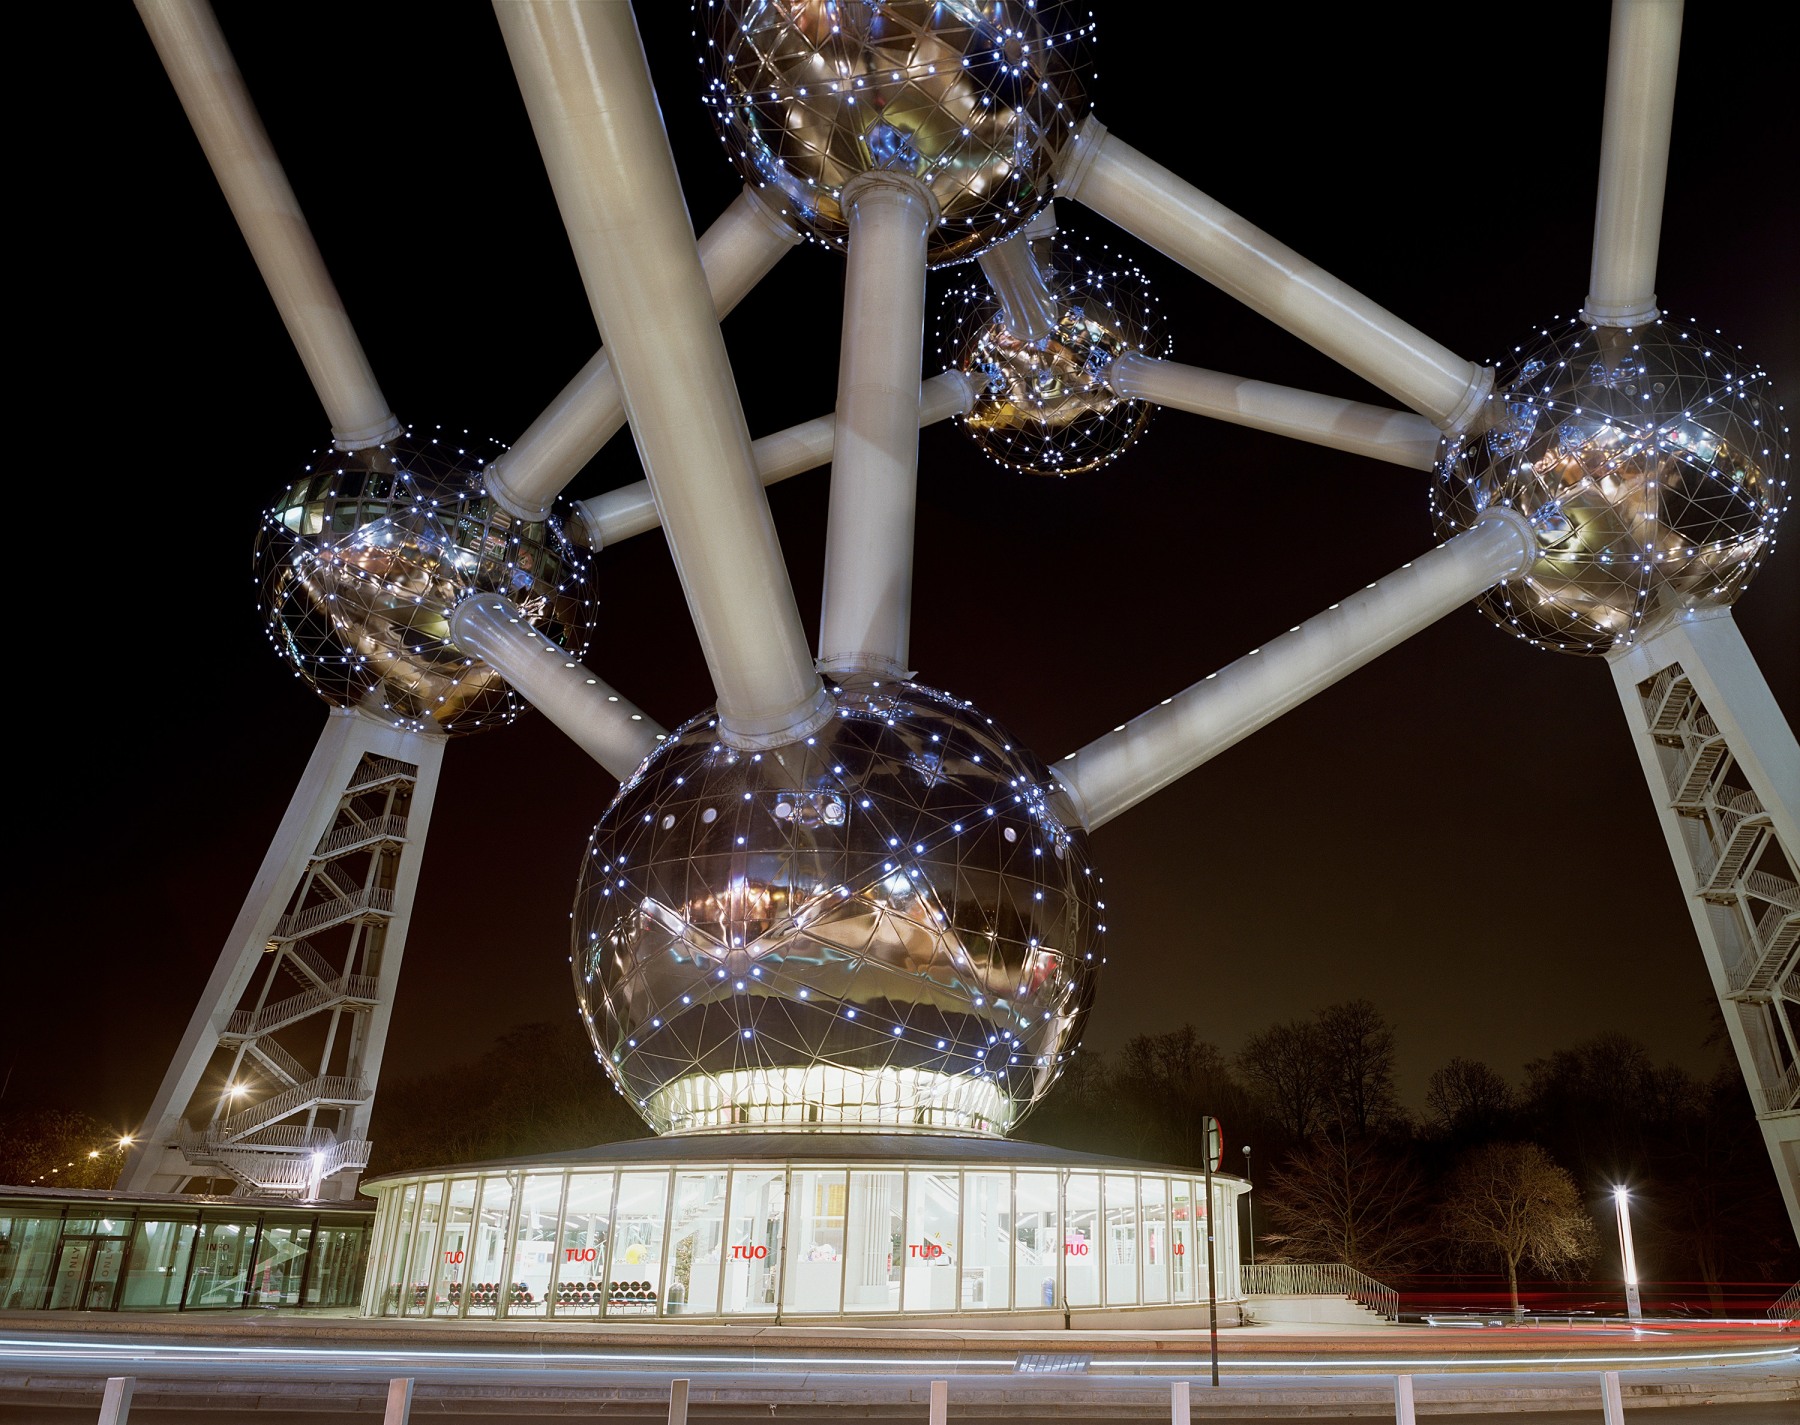 Jade Doskow the Atomium at Night from the 1958 Brussel's World's Fair